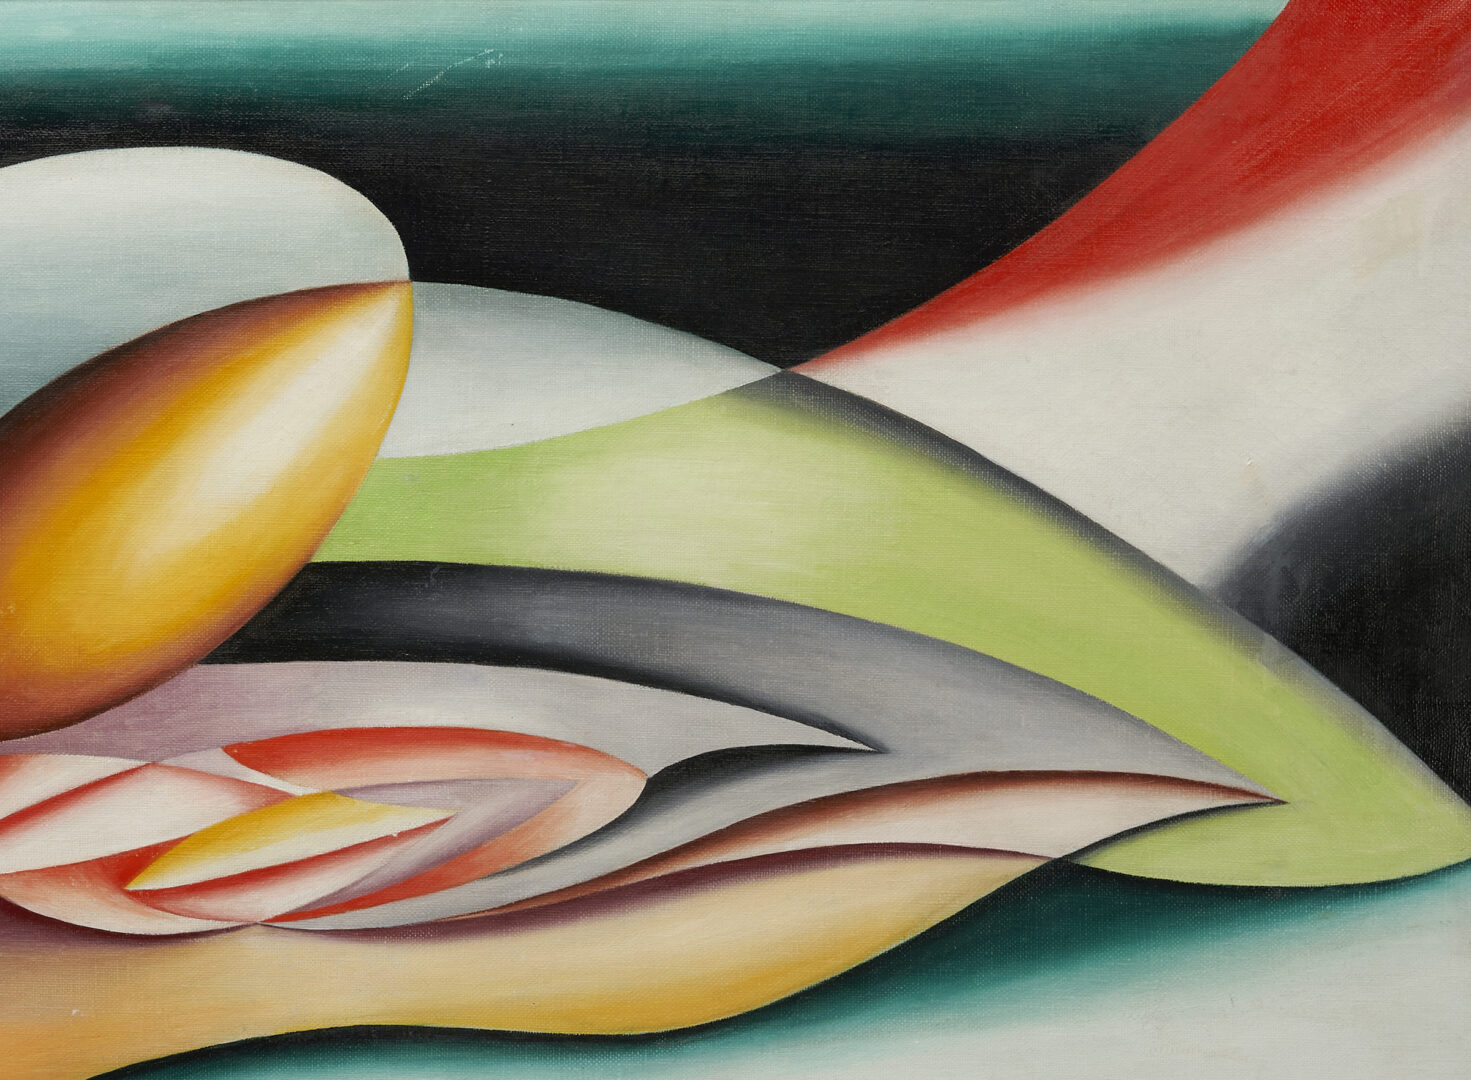 Lot 504: Philip Perkins O/C Large Abstract Painting, Weight of the Horizon, 1944